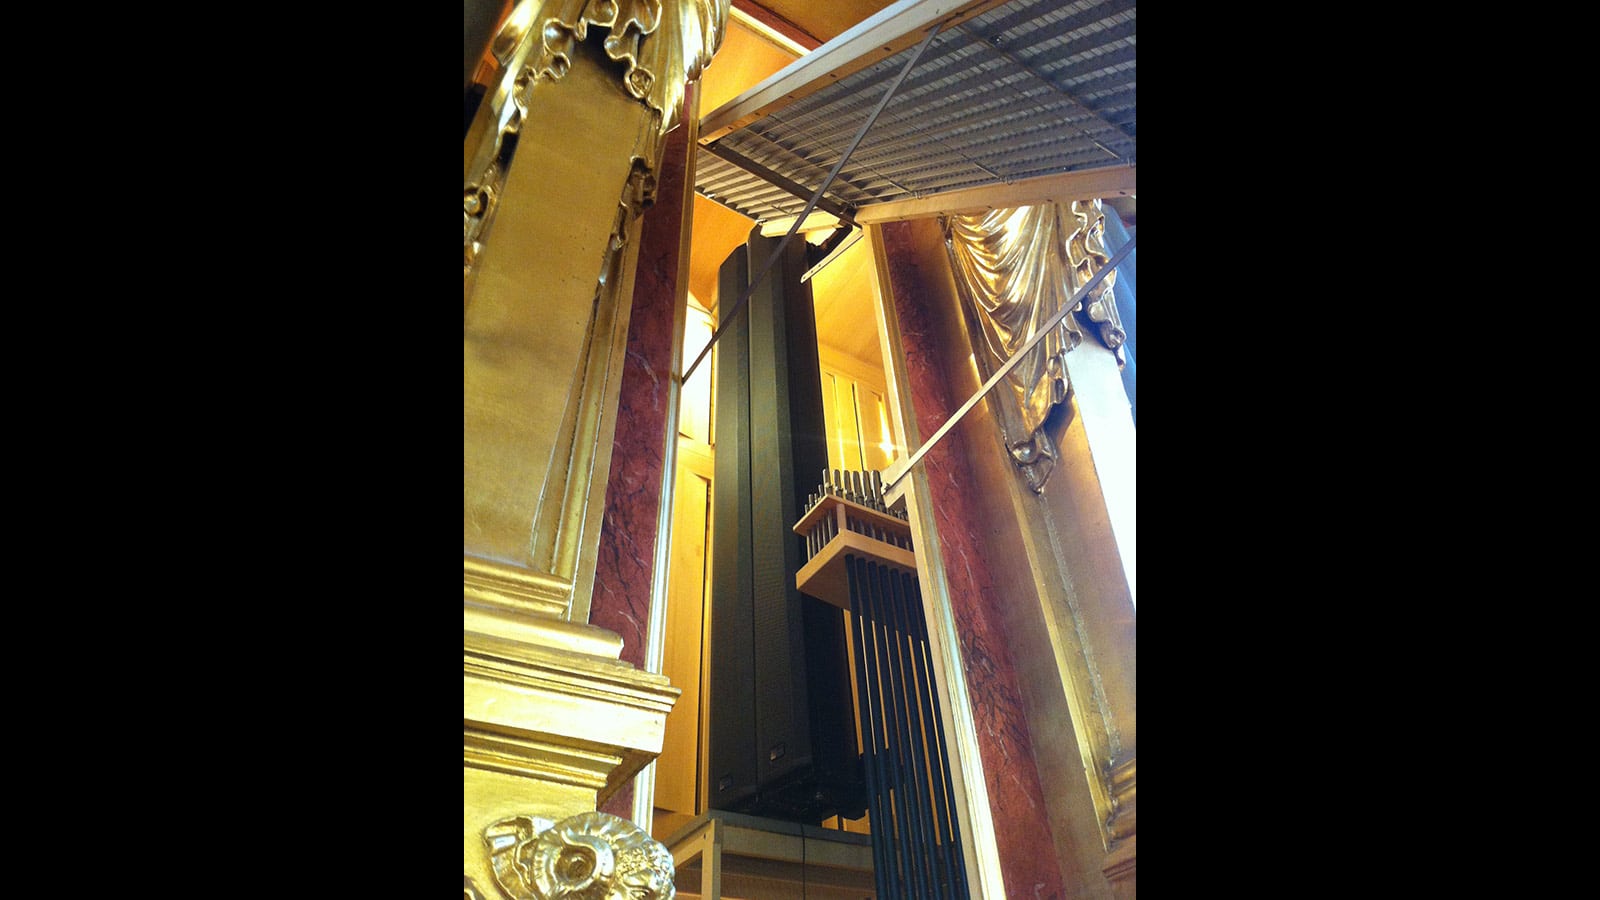 Musikverein Chooses Meyer Sound CAL: Bringing Sonic Depth and Speech Clarity to Vienna's Distinguished Concert Hall